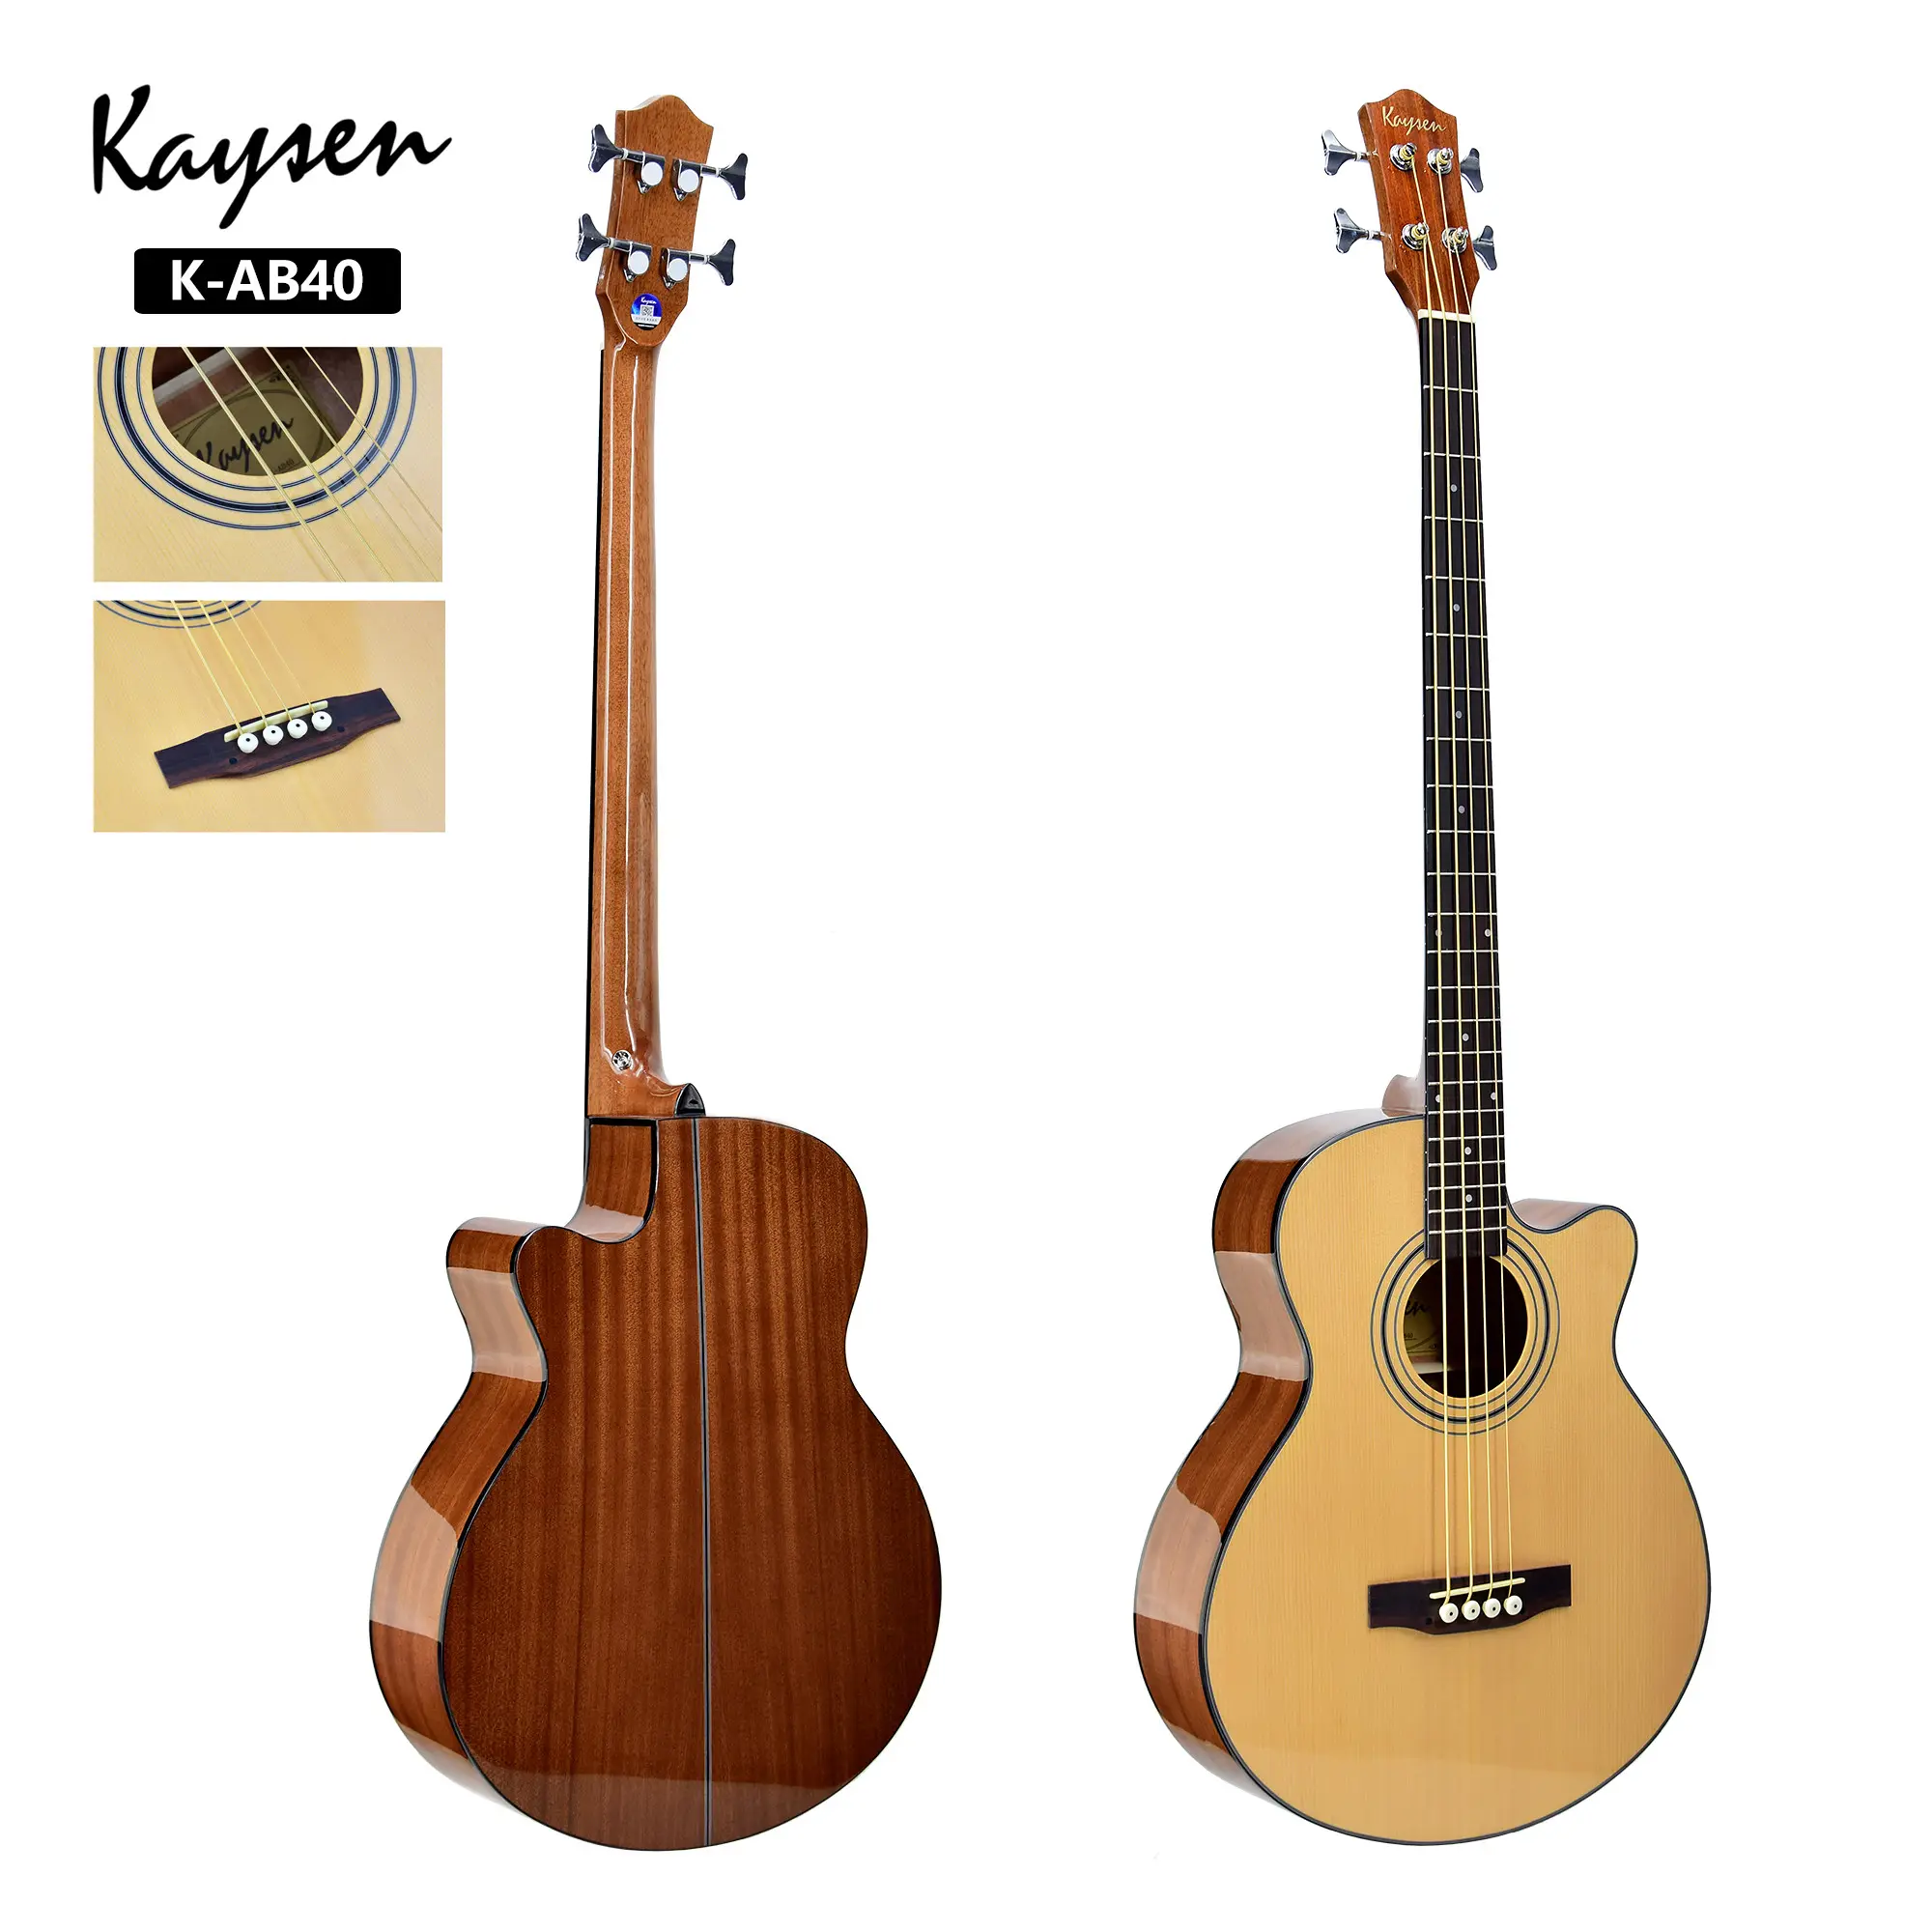 Hot-selling spruce top acoustic plywood body bass guitar with 4 strings made in china